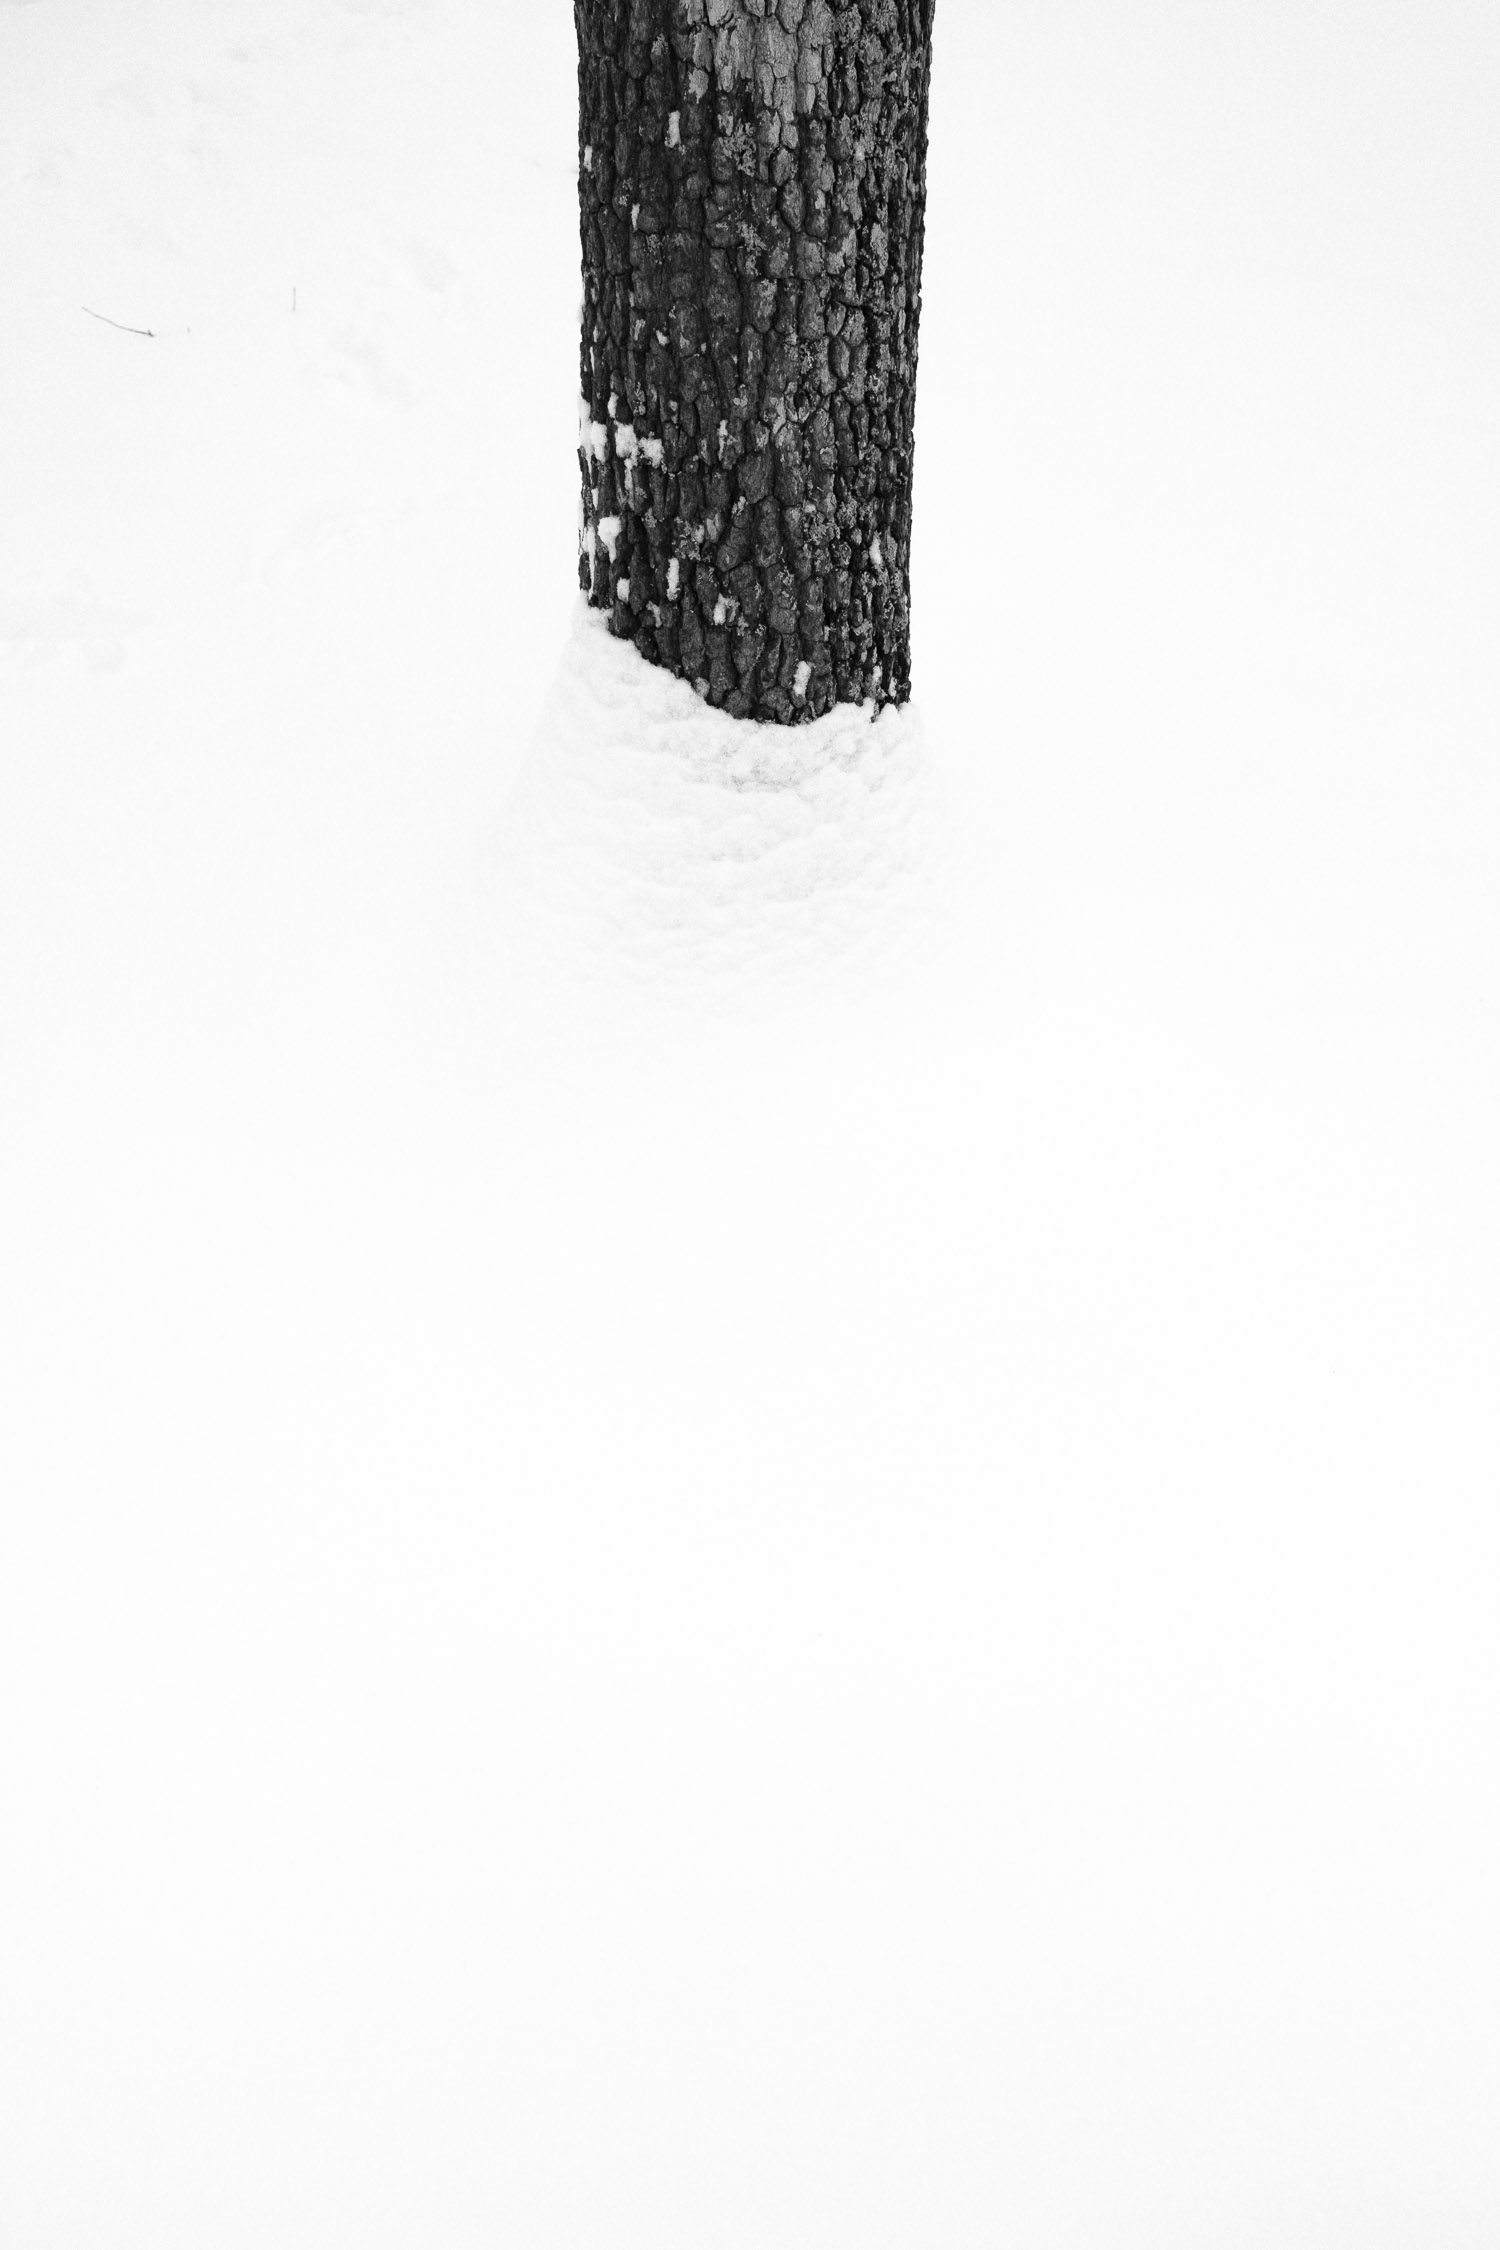 tree trunk with bark detail in the snow